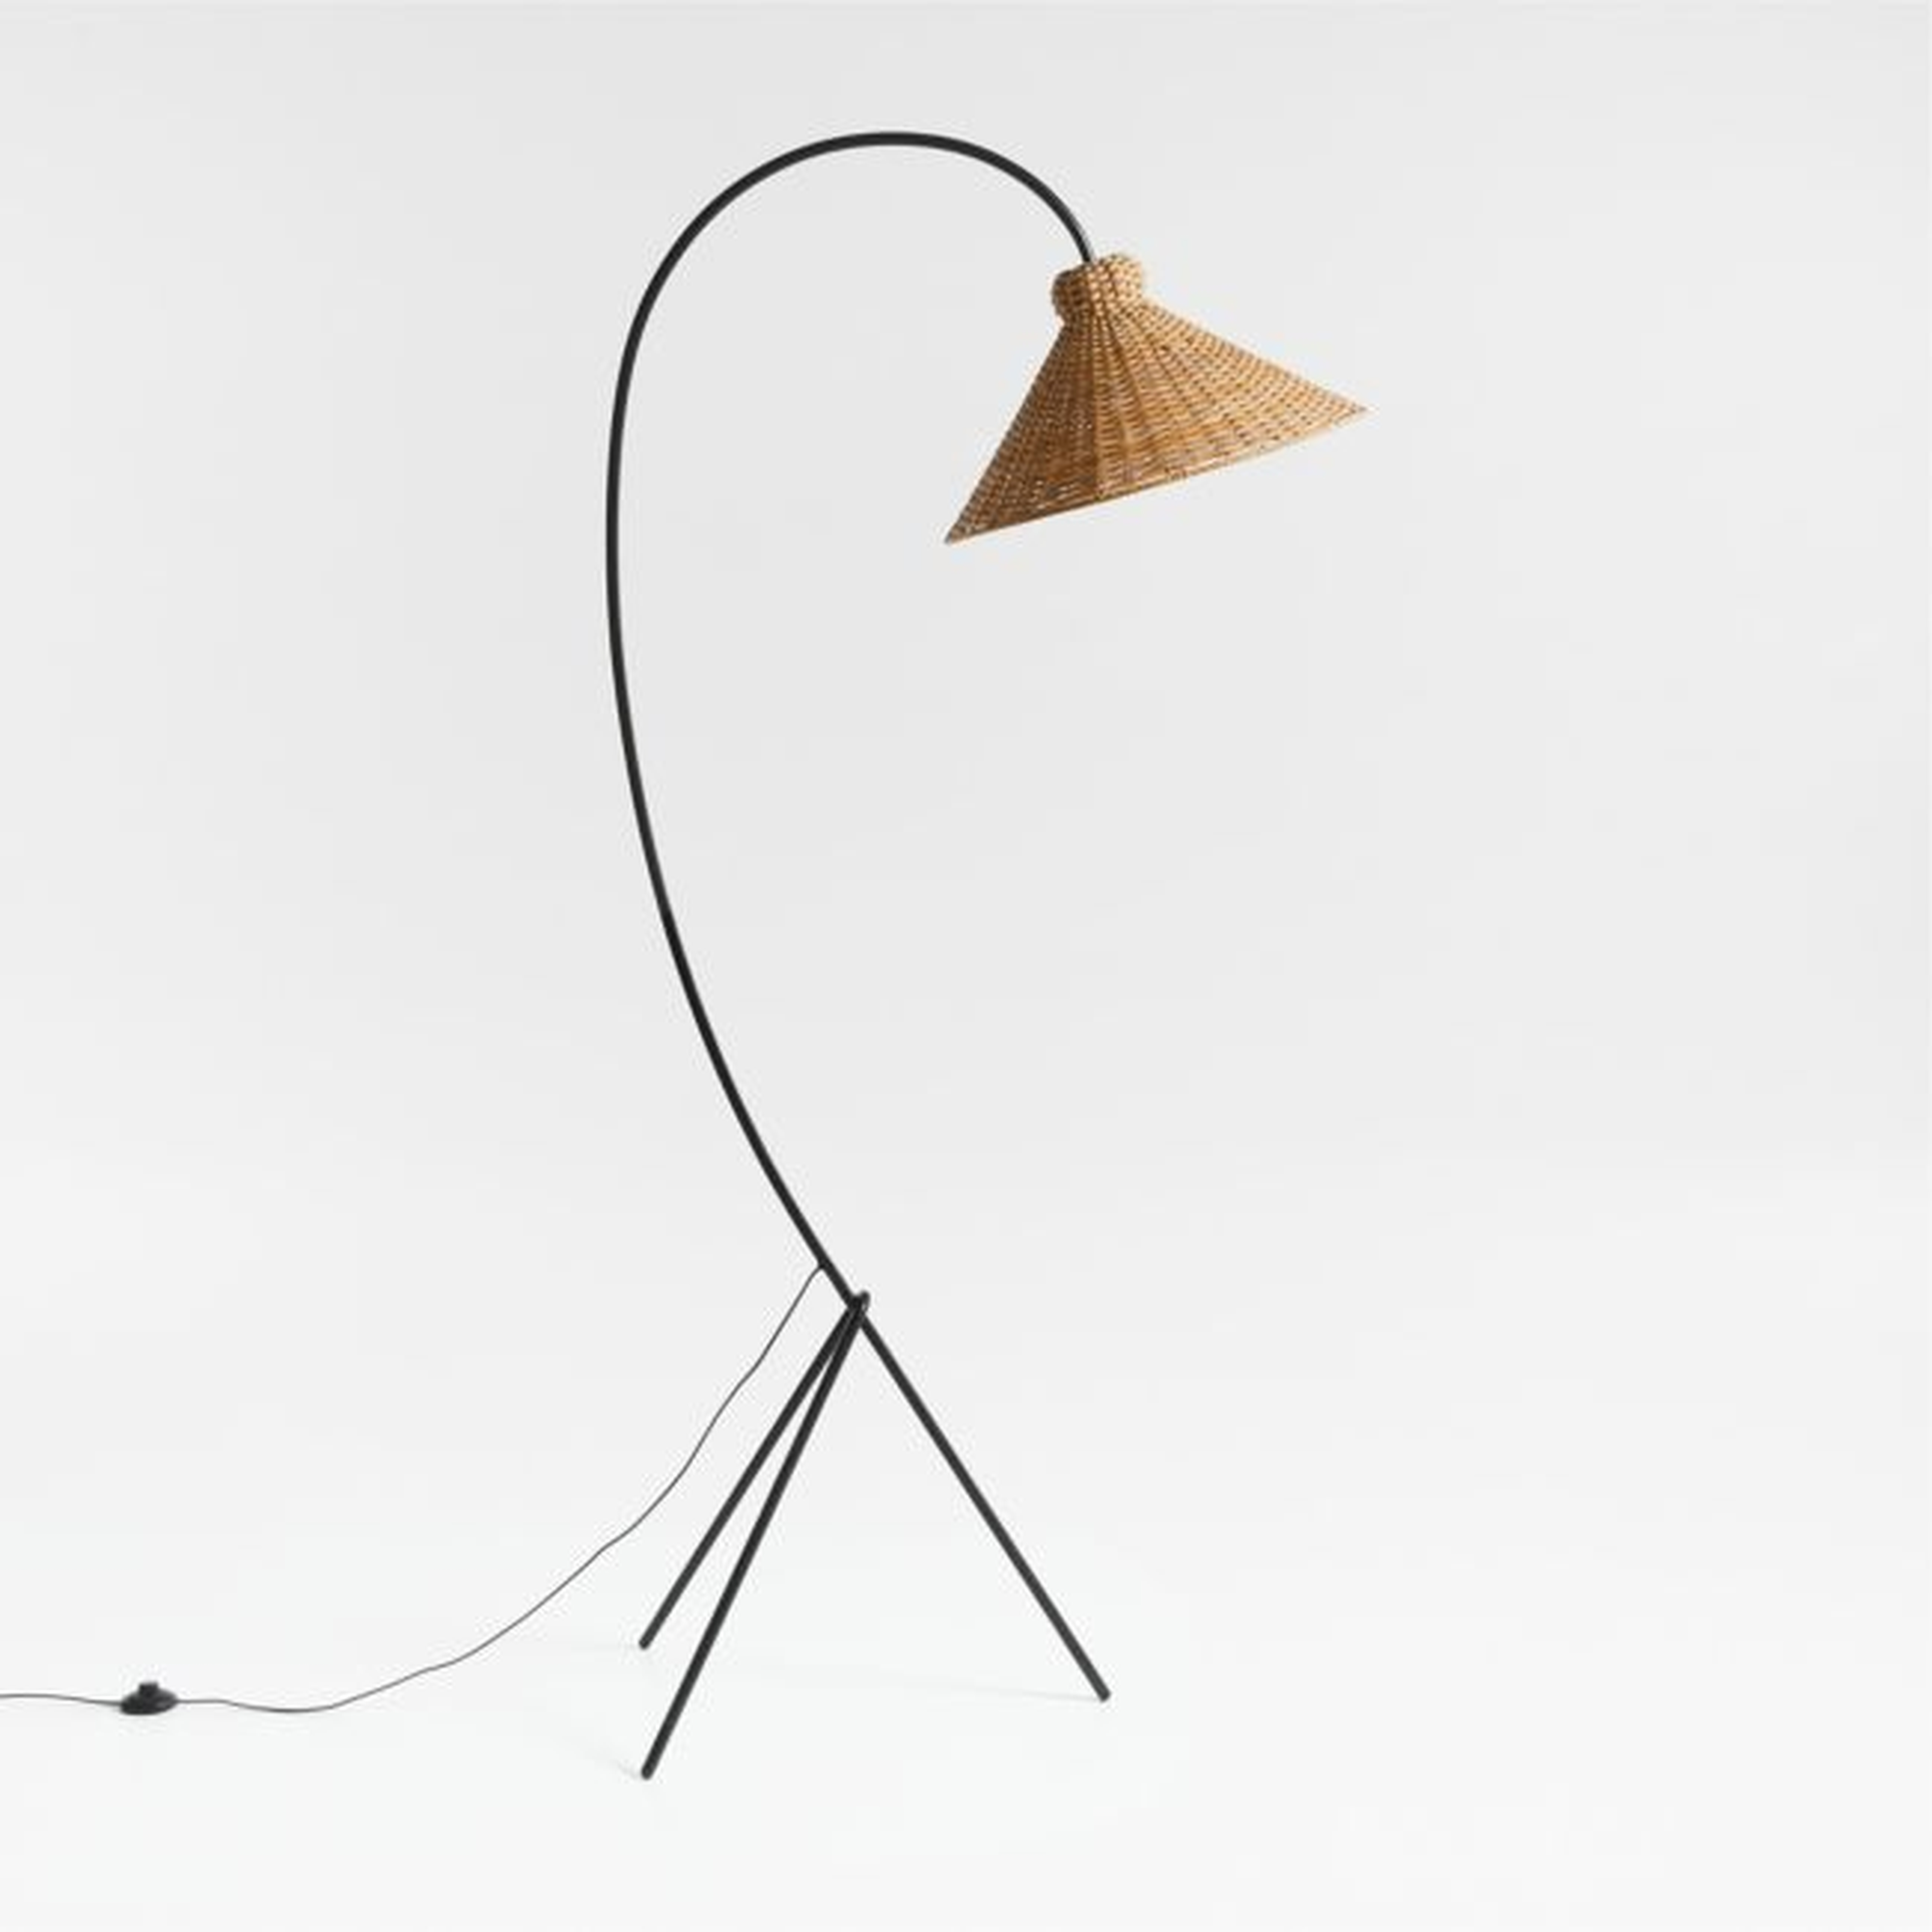 L'Union Black Metal Arc Floor Lamp with Rattan Shade by Athena Calderone - Crate and Barrel